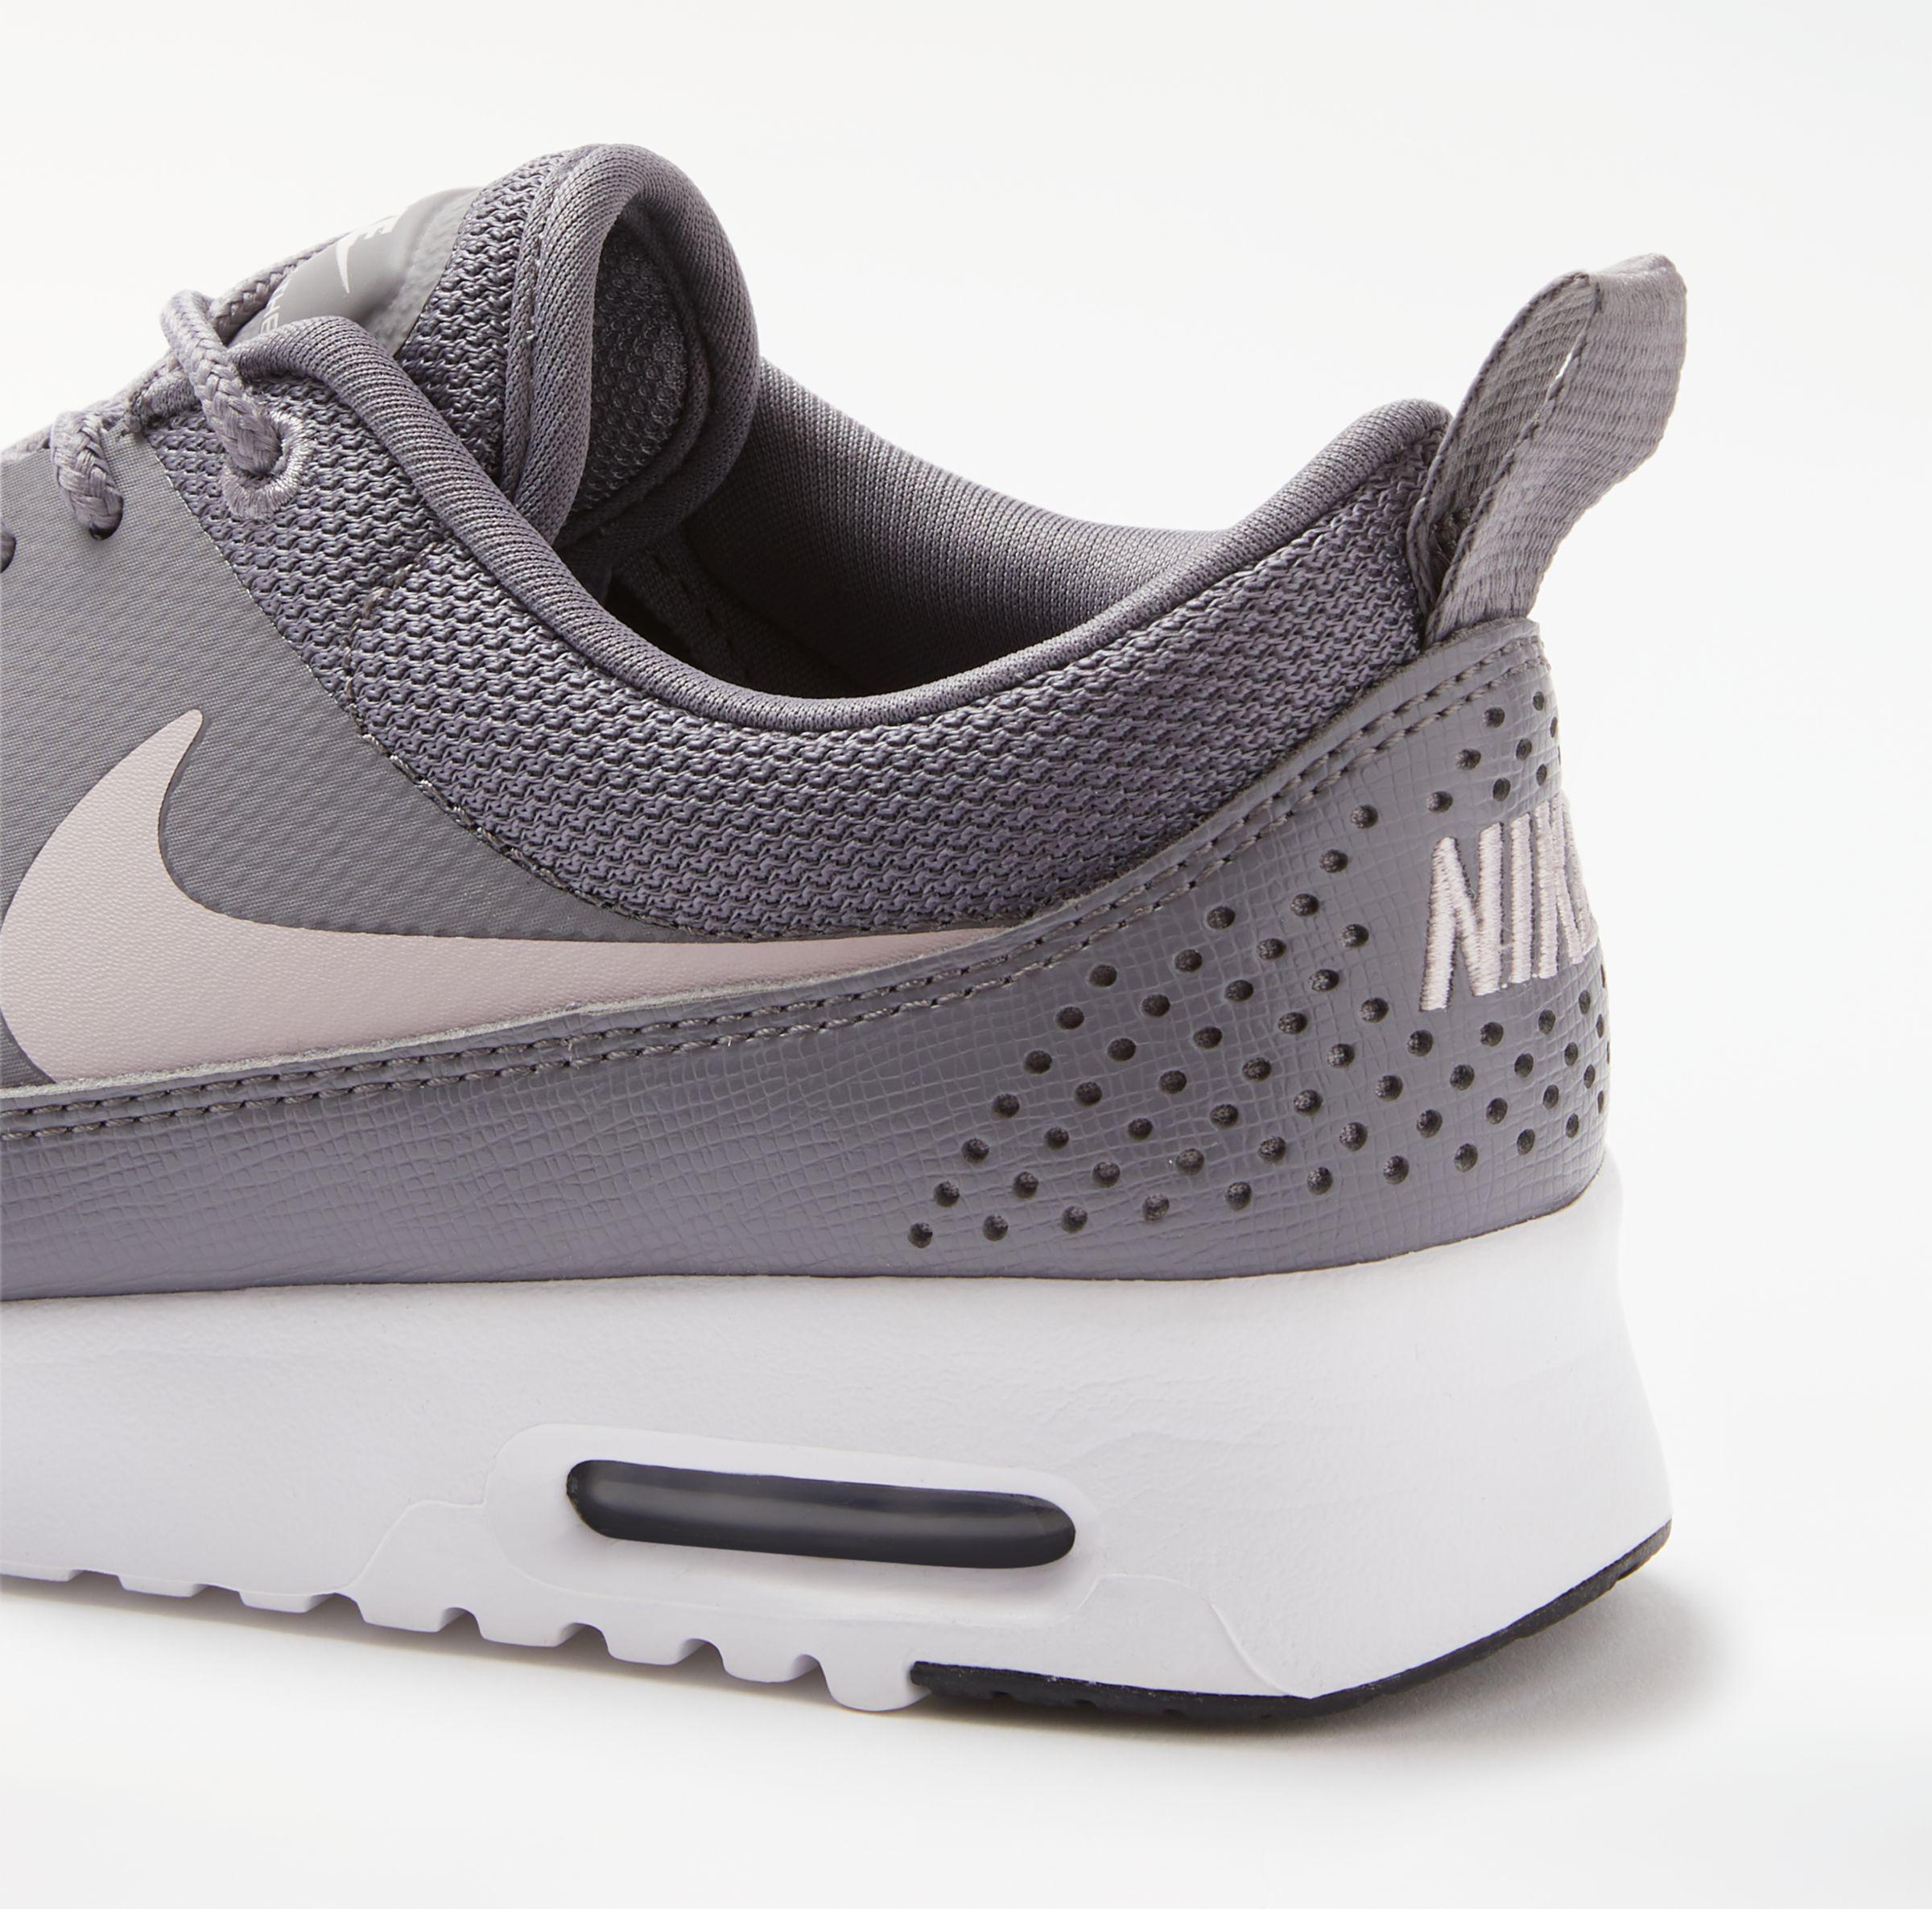 Nike Synthetic Air Max Thea Women's 